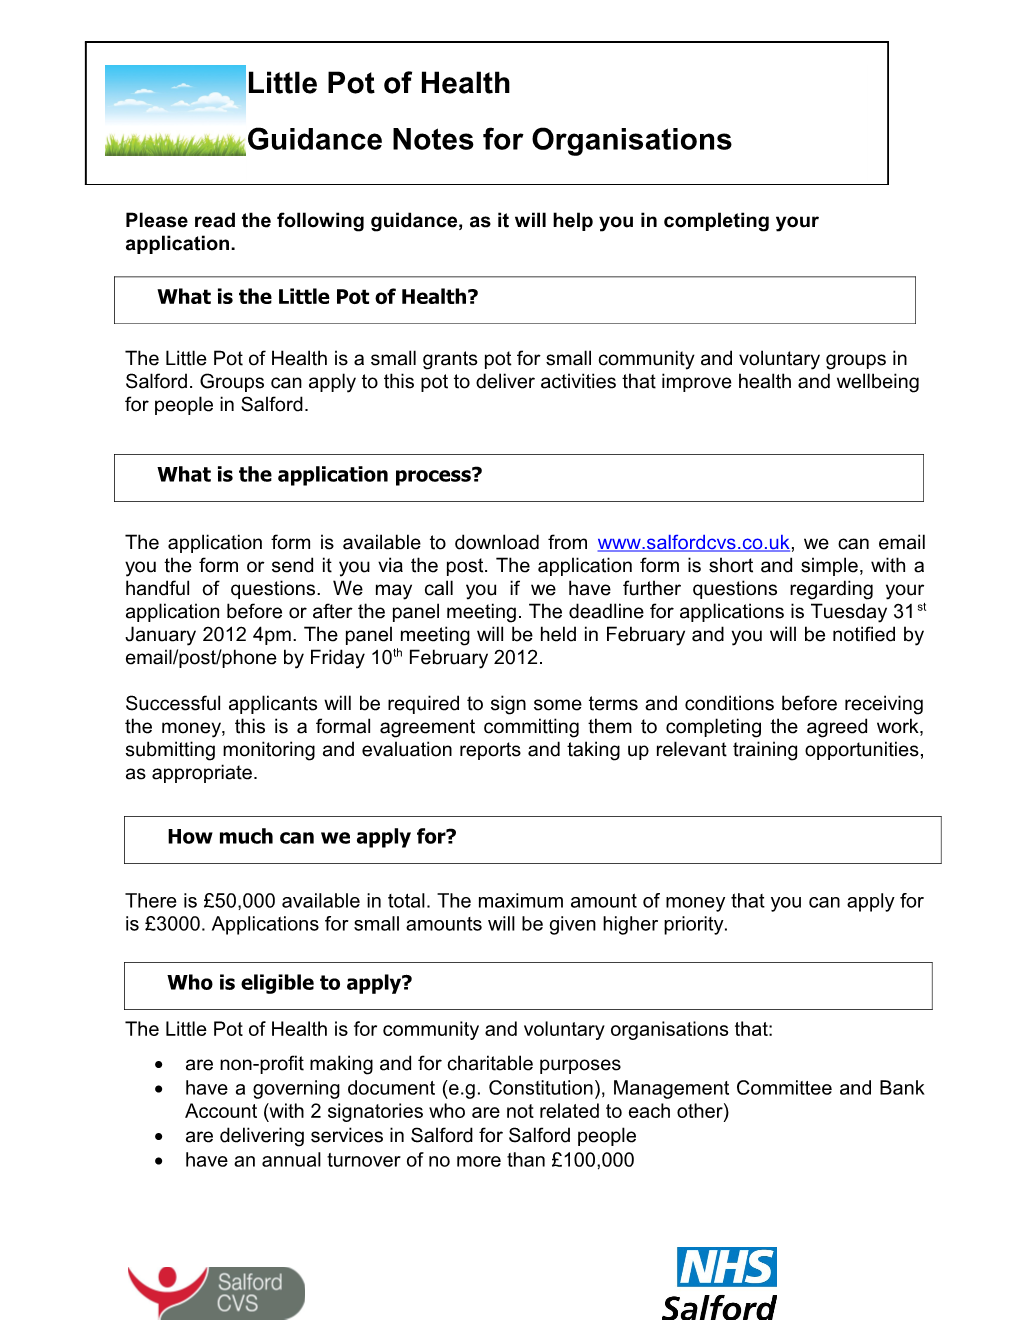 Please Read the Following Guidance, As It Will Help You in Completing Your Application